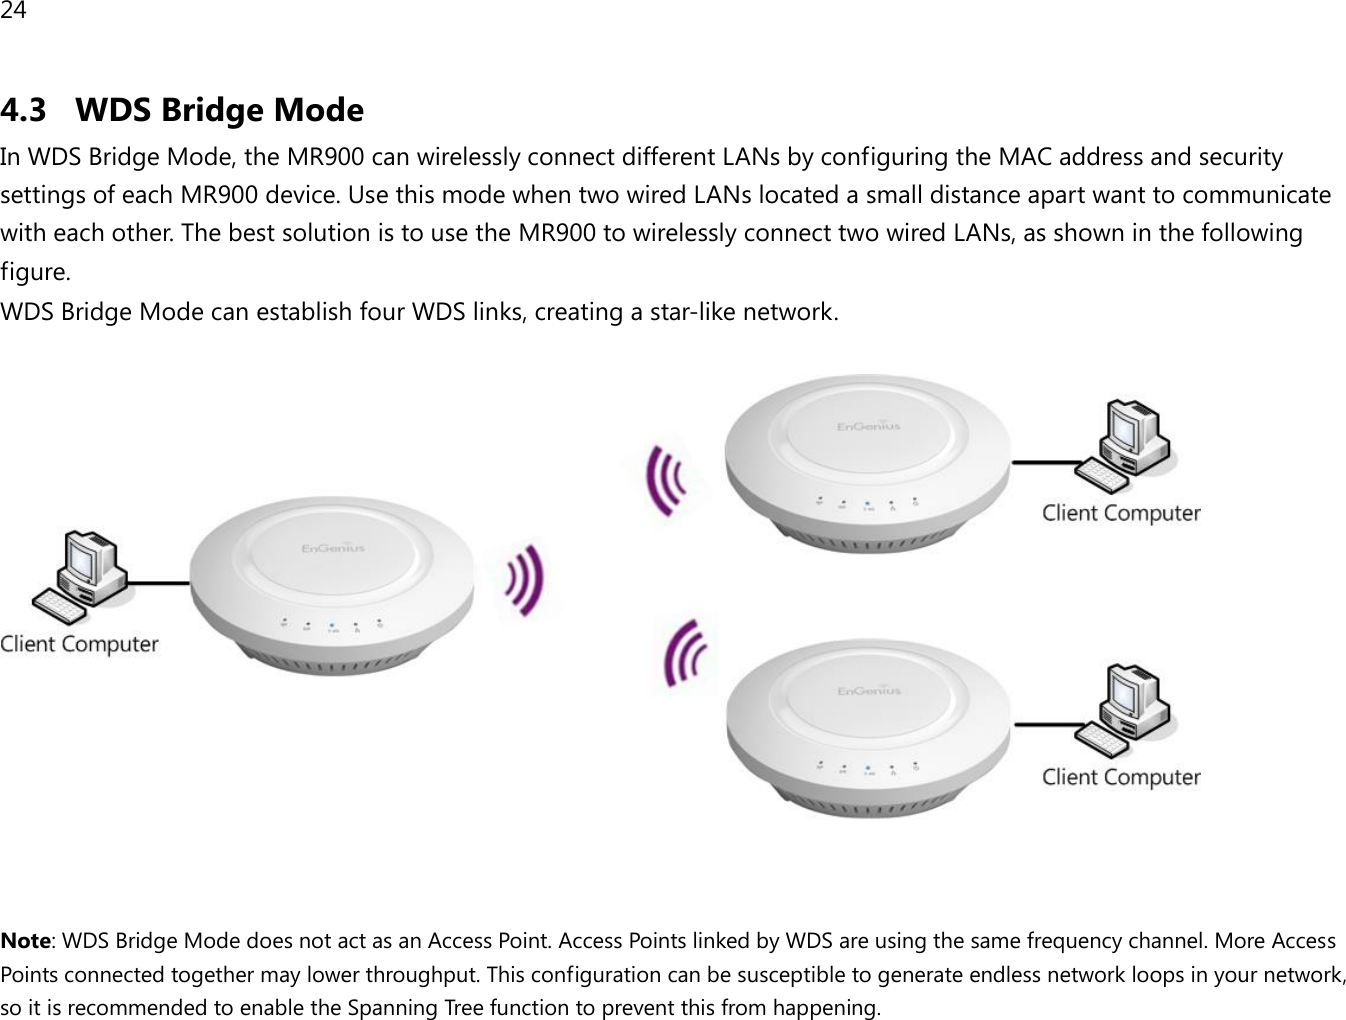 24 4.3 WDS Bridge Mode In WDS Bridge Mode, the MR900 can wirelessly connect different LANs by configuring the MAC address and security settings of each MR900 device. Use this mode when two wired LANs located a small distance apart want to communicate with each other. The best solution is to use the MR900 to wirelessly connect two wired LANs, as shown in the following figure.  WDS Bridge Mode can establish four WDS links, creating a star-like network.     Note: WDS Bridge Mode does not act as an Access Point. Access Points linked by WDS are using the same frequency channel. More Access Points connected together may lower throughput. This configuration can be susceptible to generate endless network loops in your network, so it is recommended to enable the Spanning Tree function to prevent this from happening. 